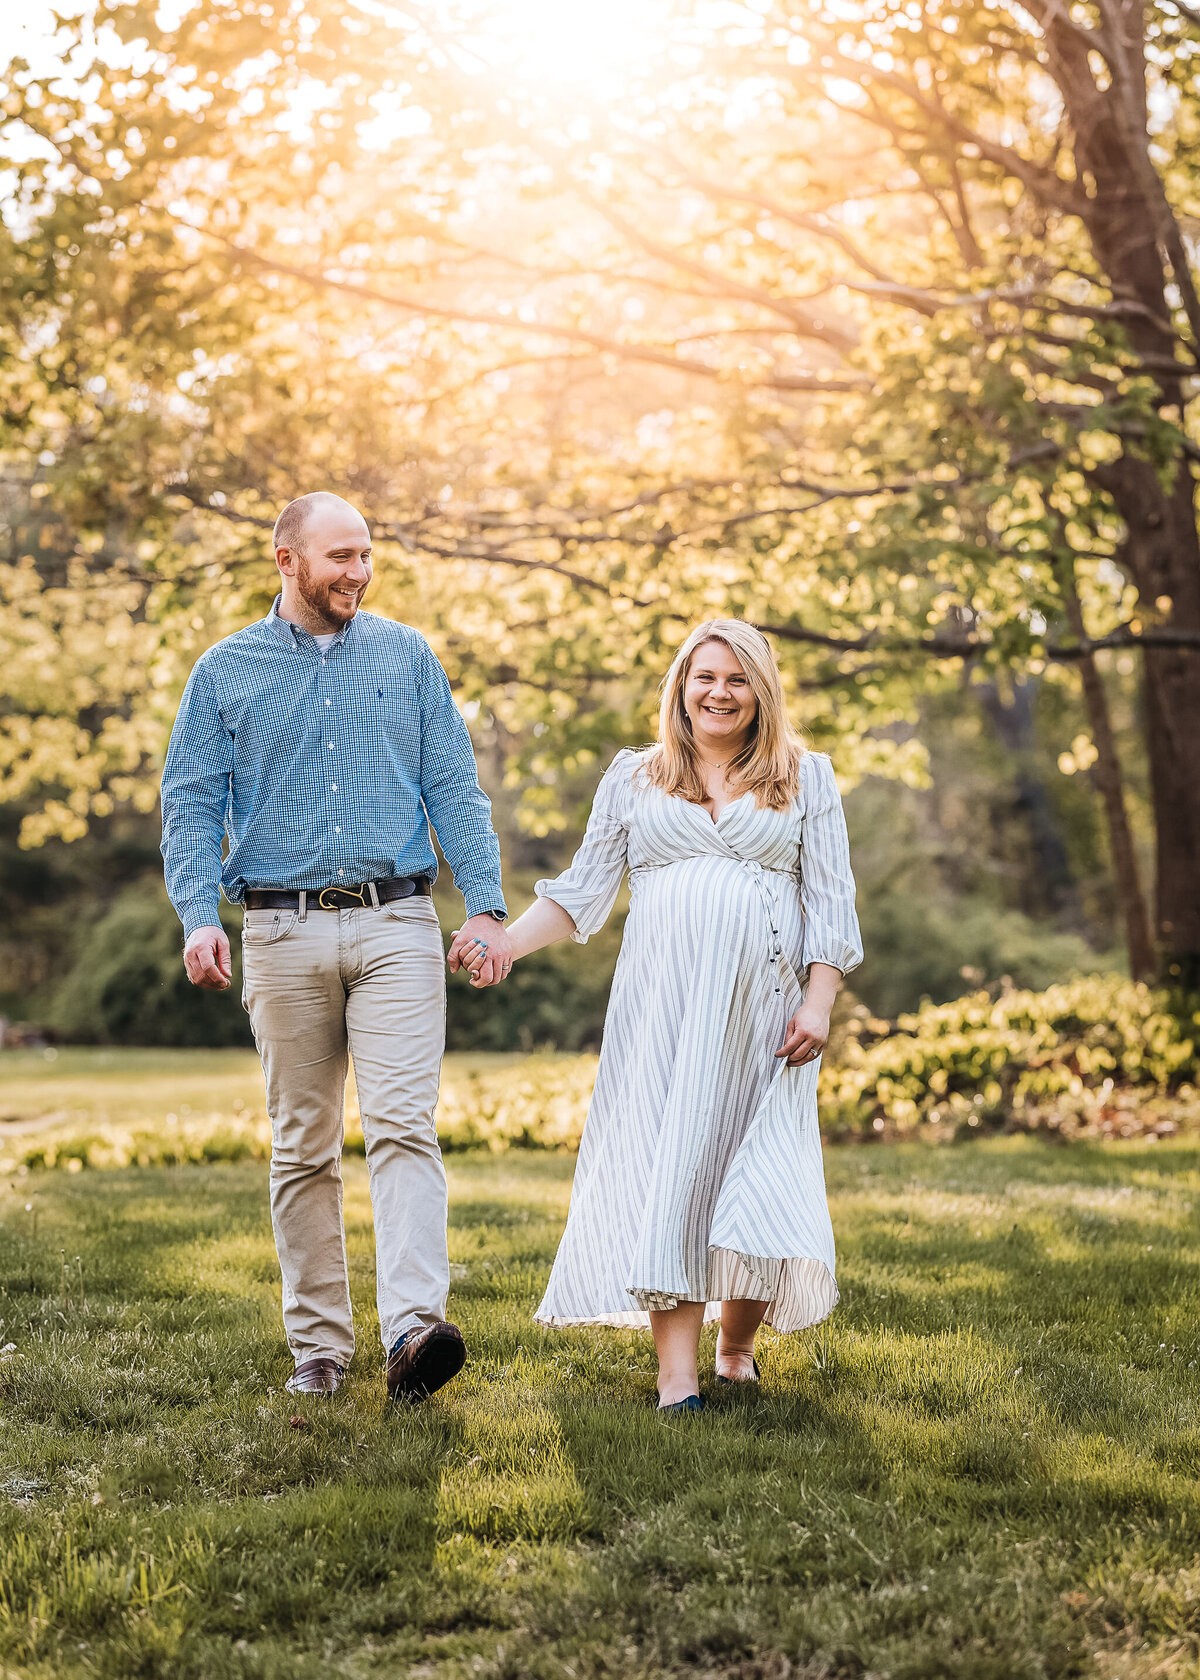 Husband and wife holding hands in maternity photo by lisa Smith Photography